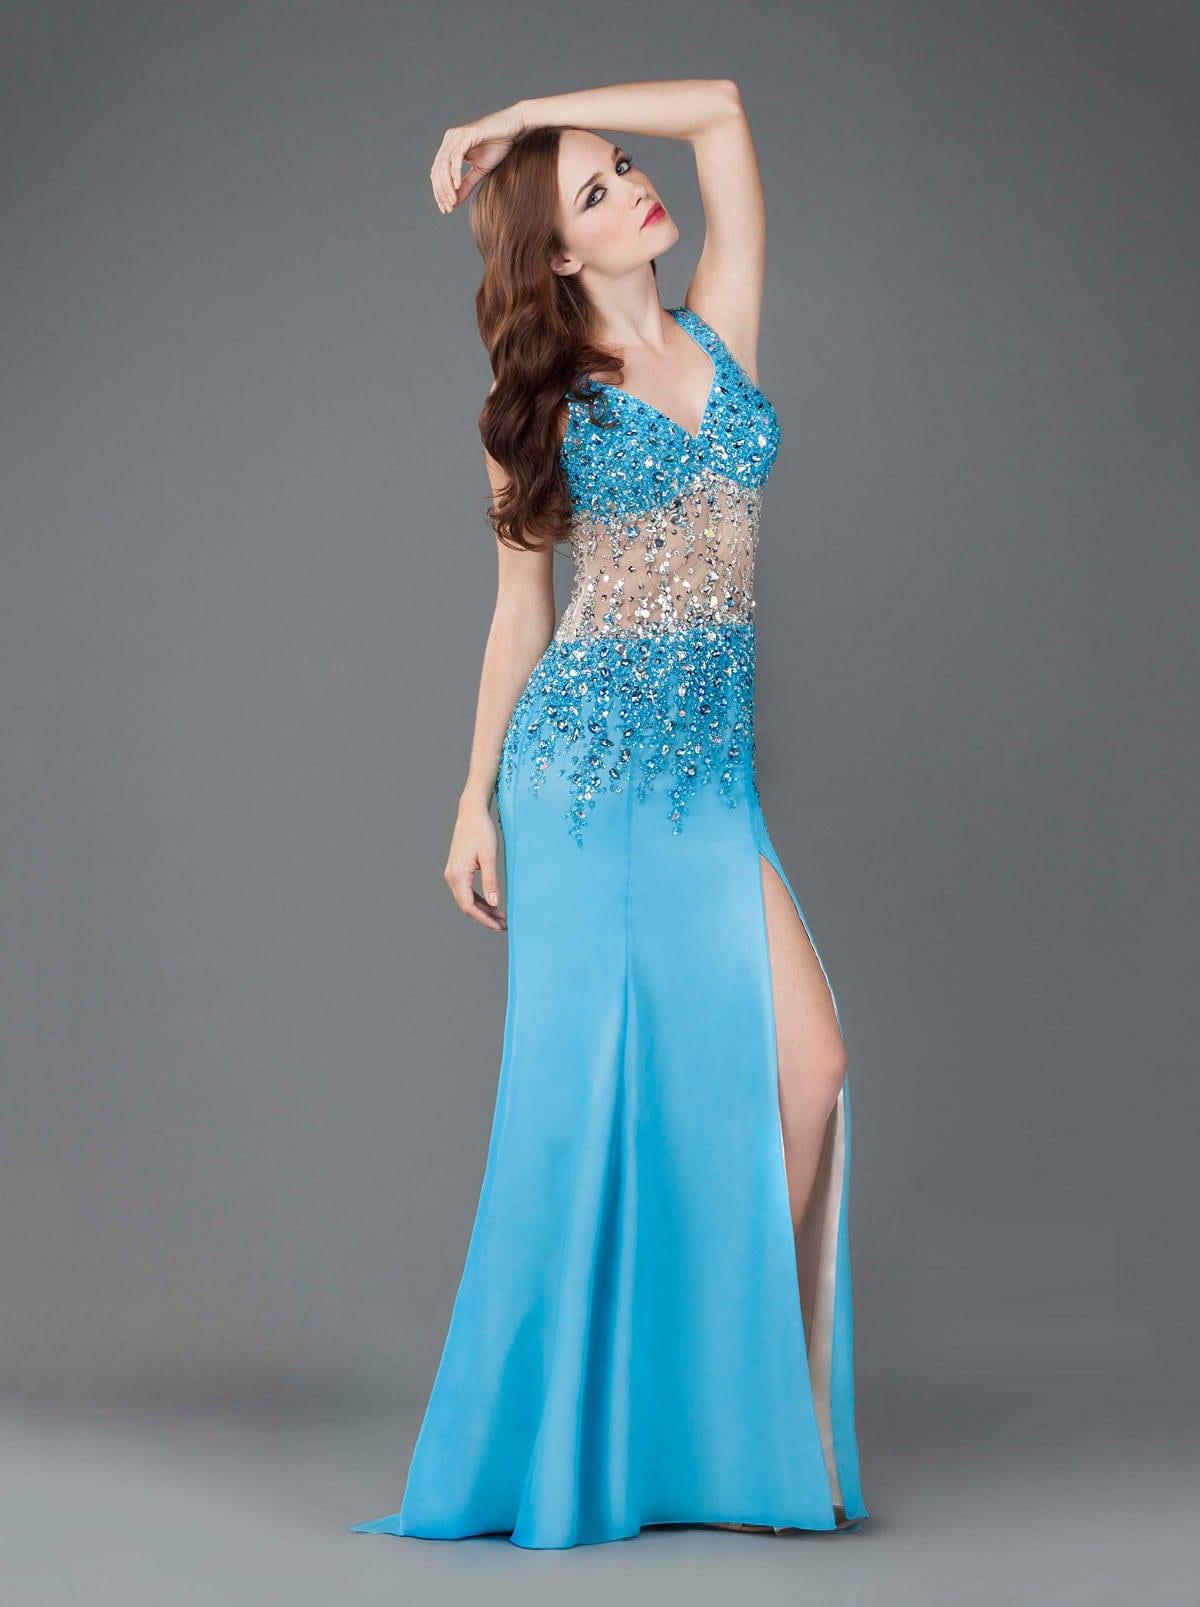 Custom Pageant Gowns - Beauty Competition Dresses